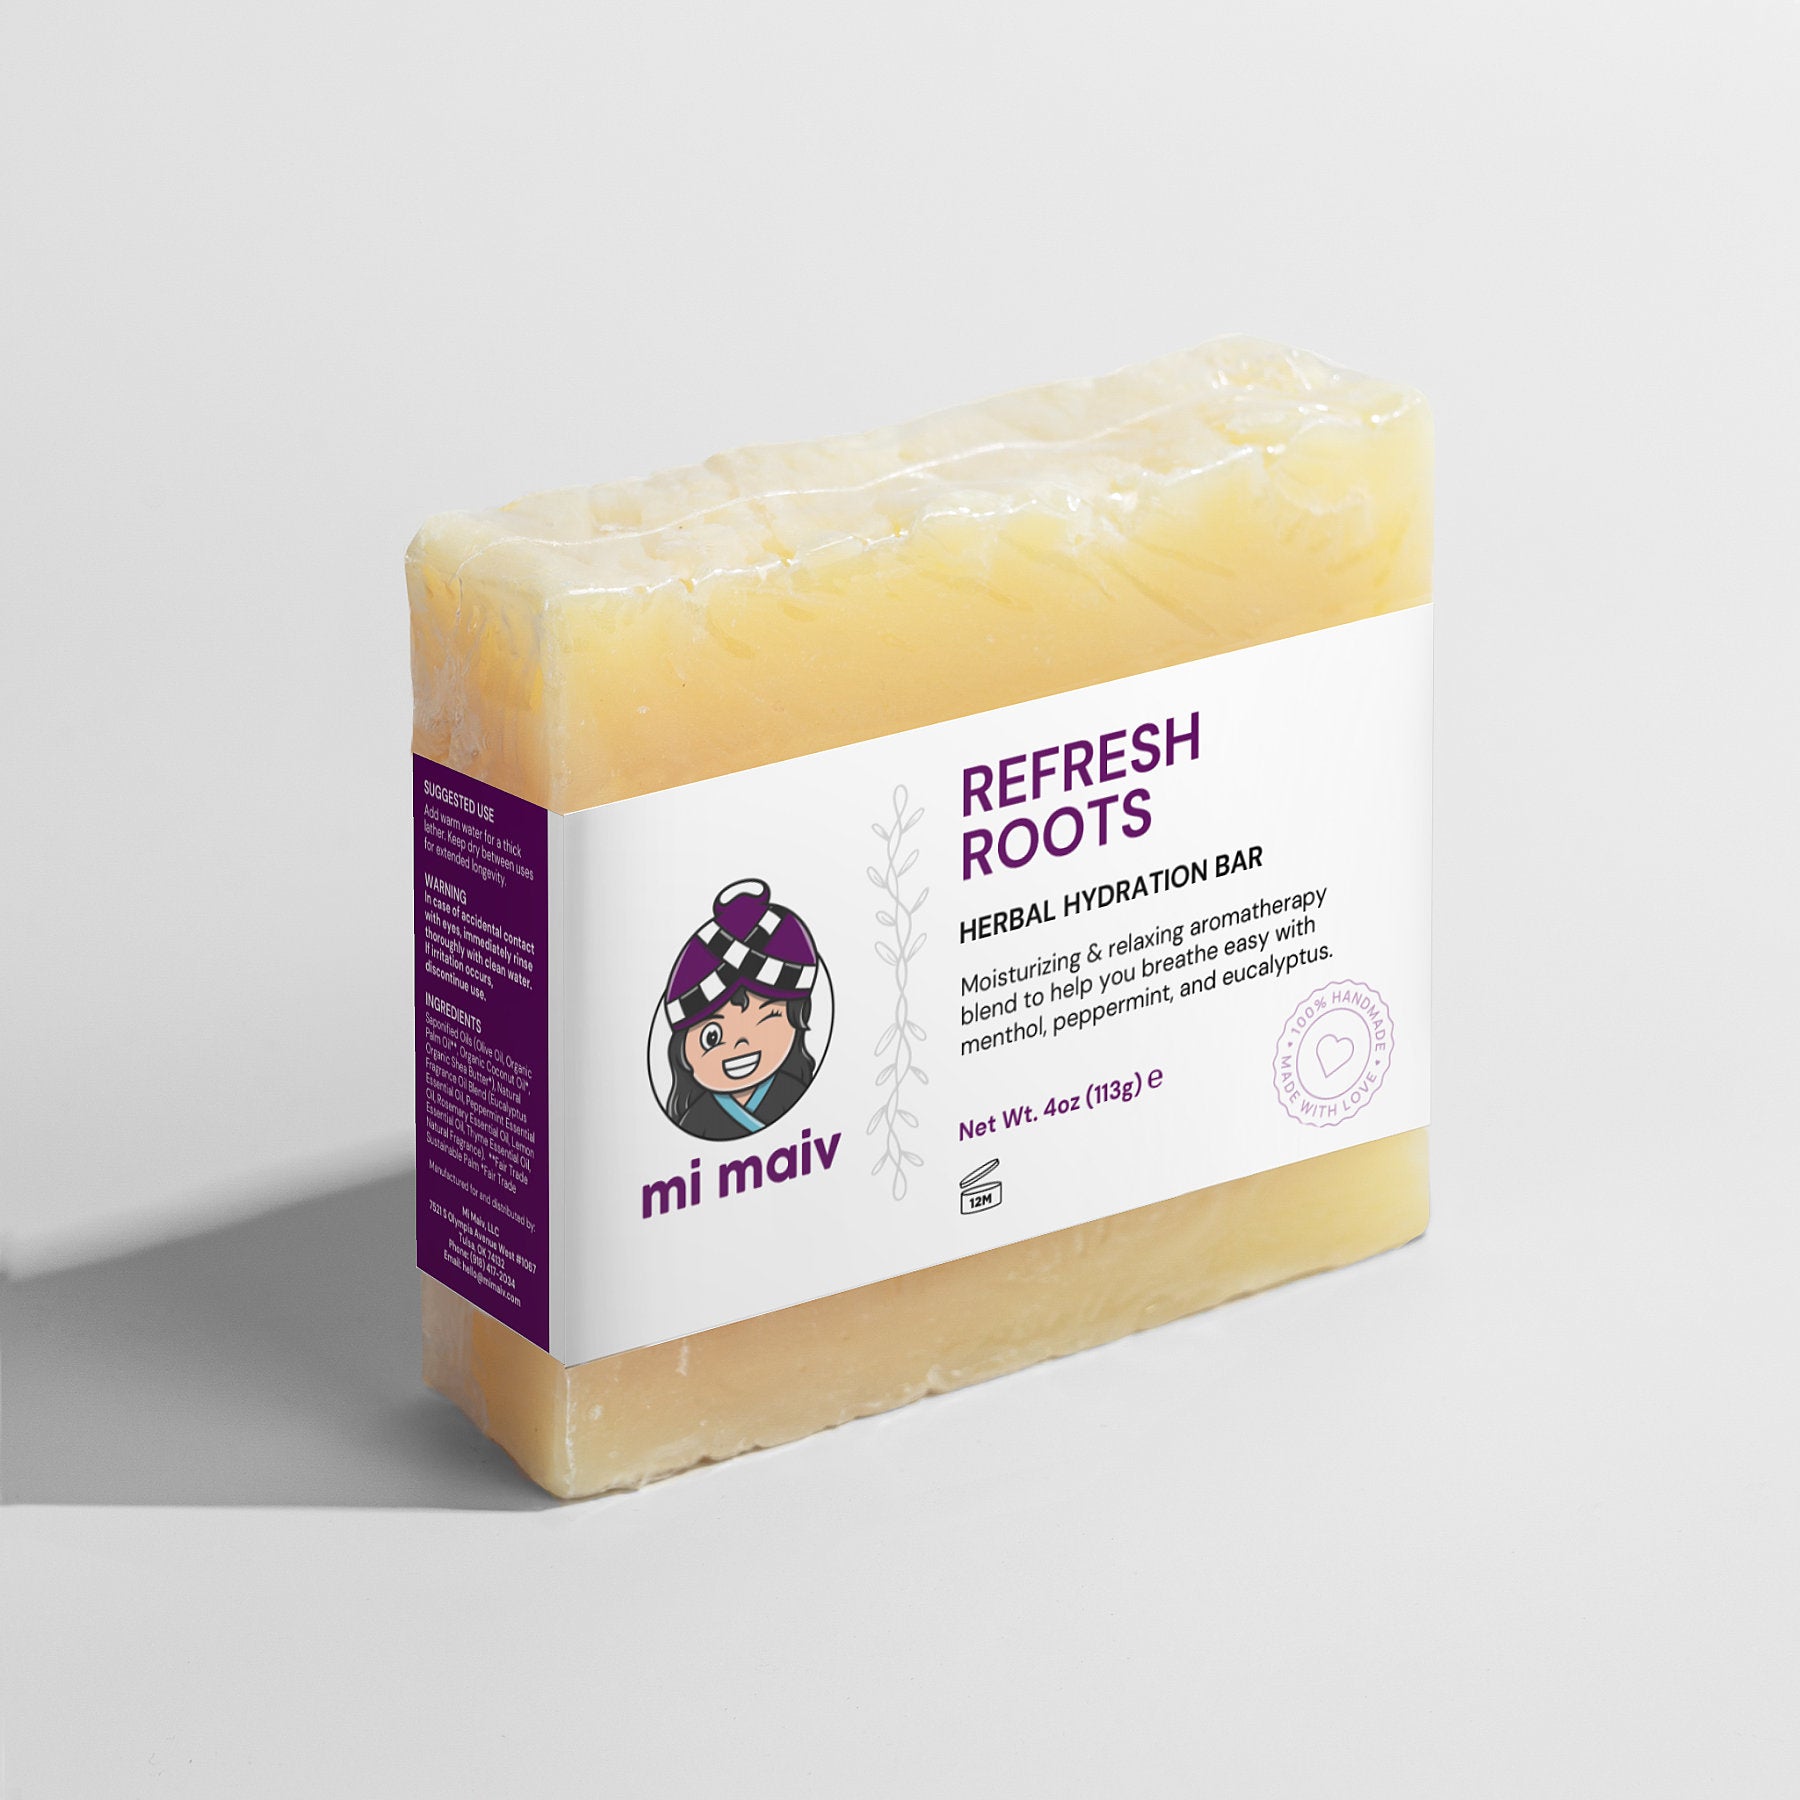 Refresh Roots Herbal Hydration Bar, Handcrafted, 4 oz